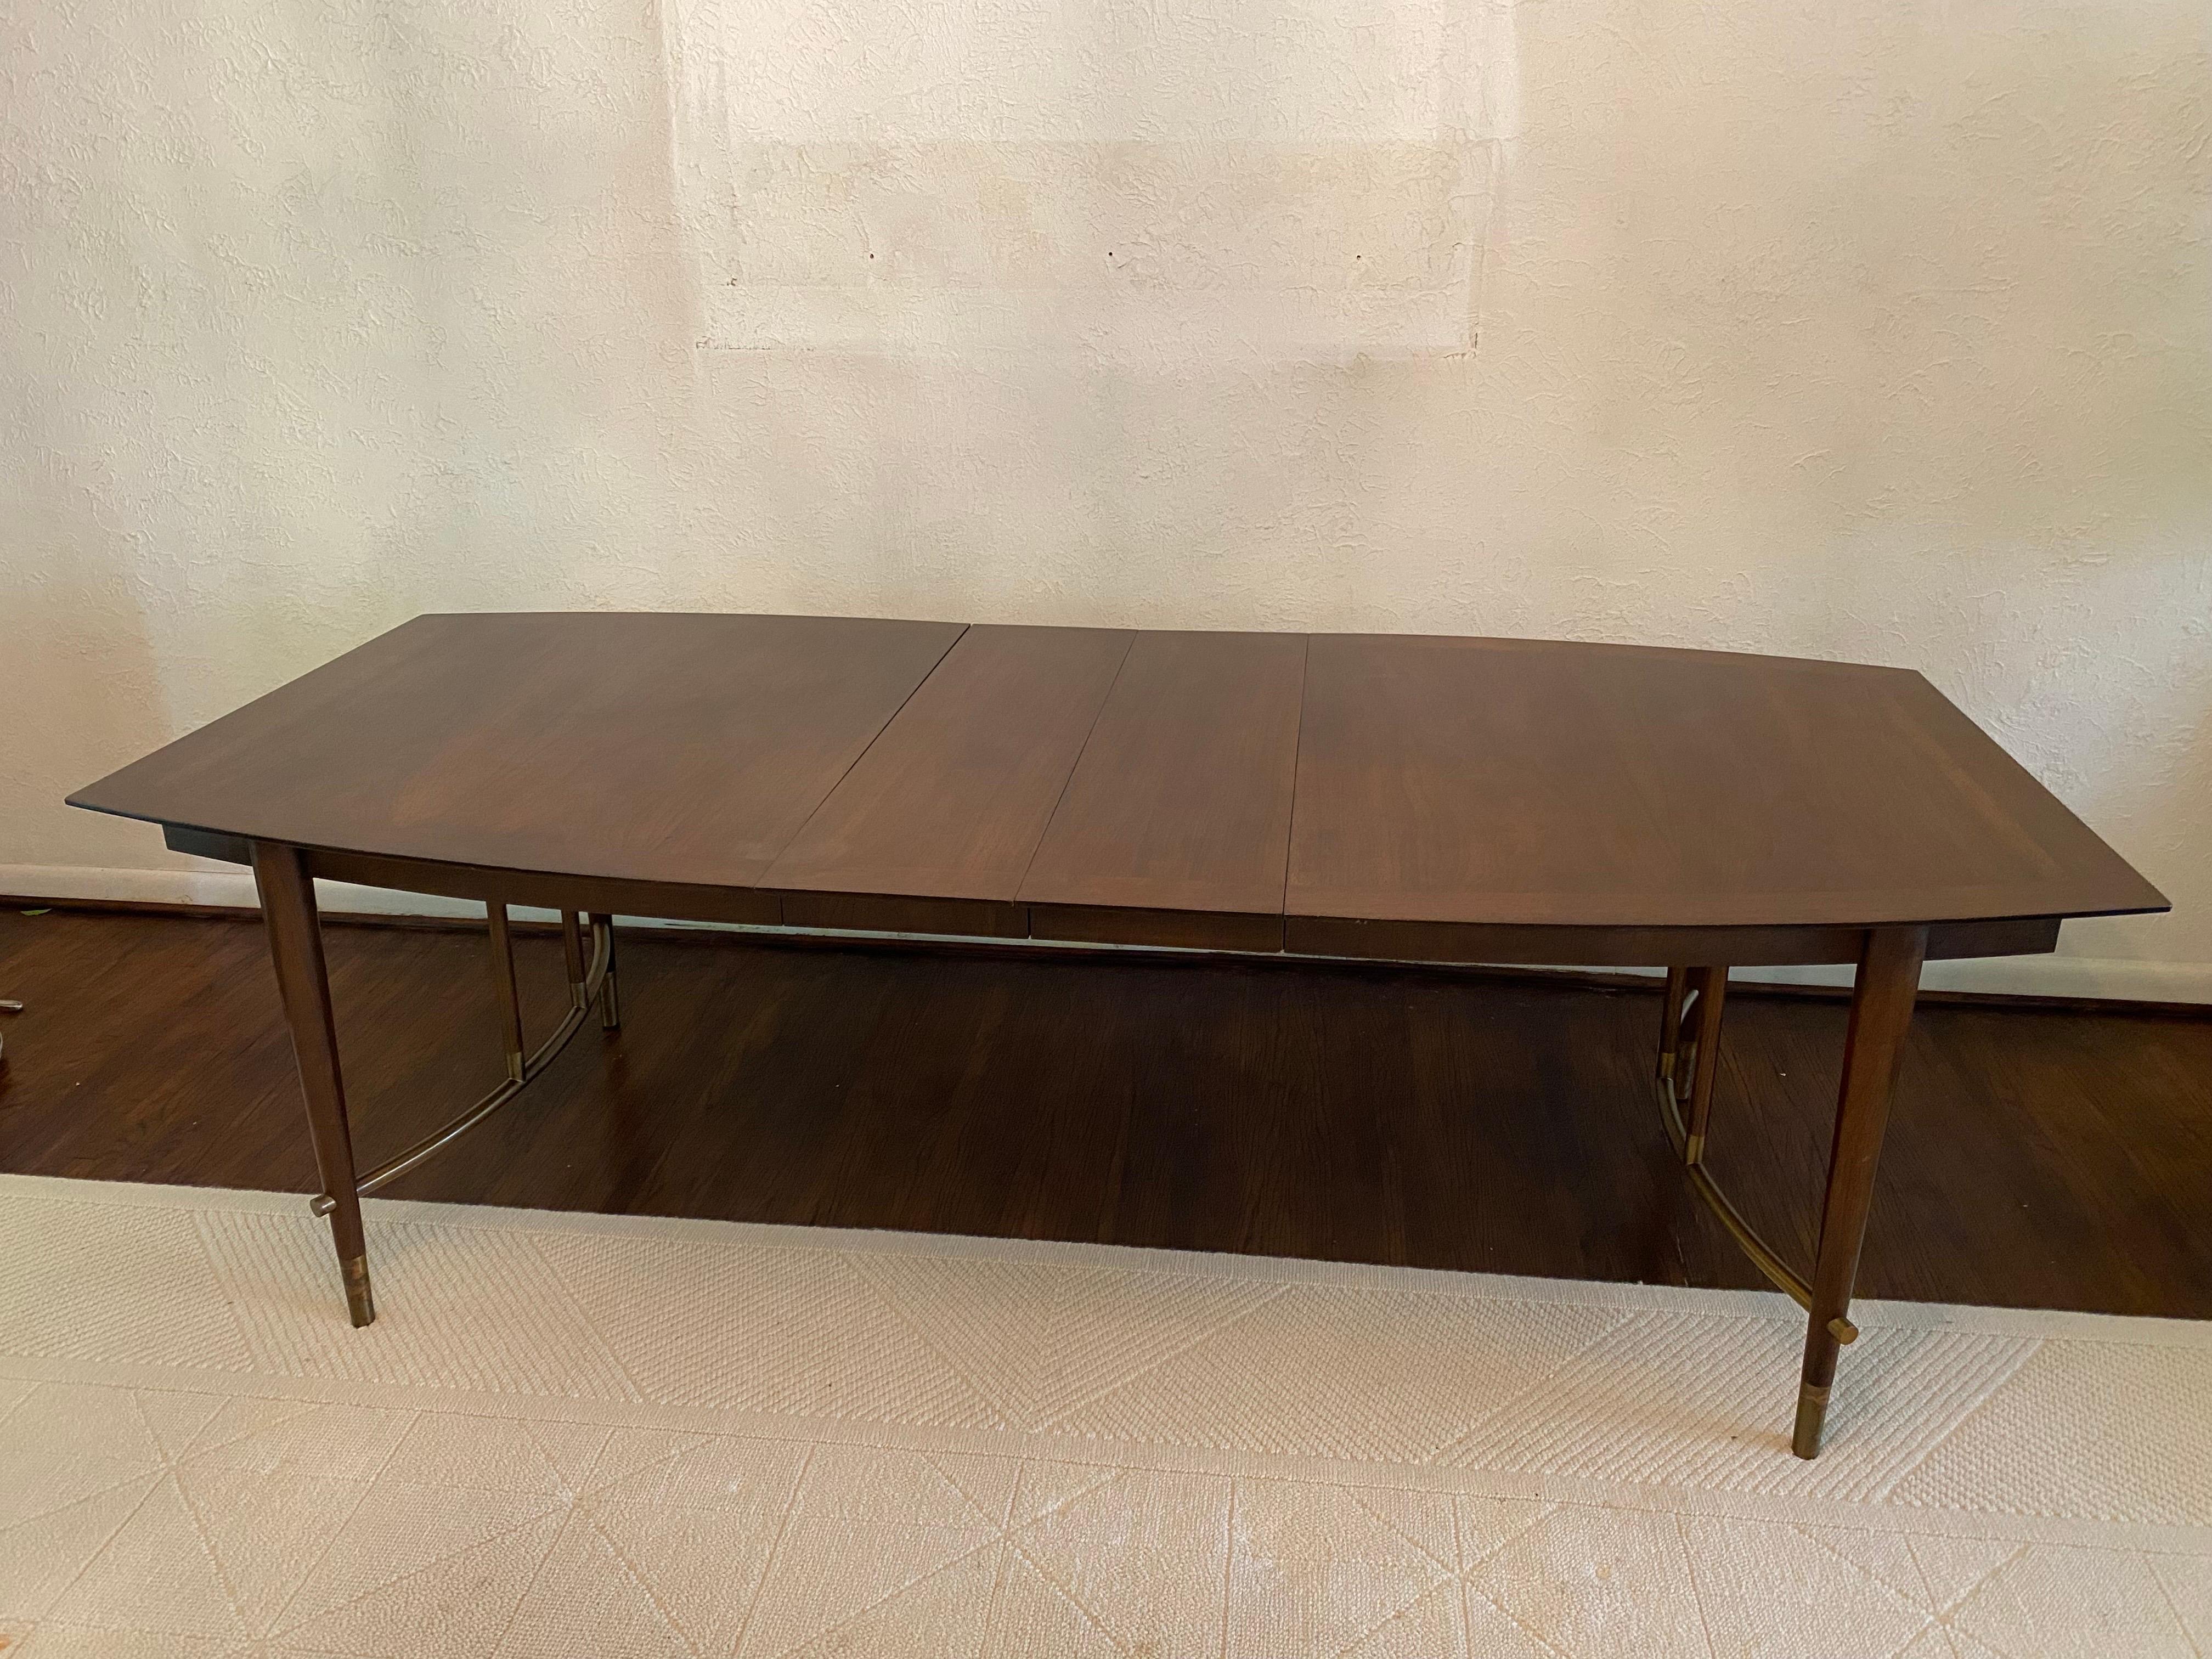 Walnut Bert England for Johnson Furniture Dining Room Table and 6 chairs